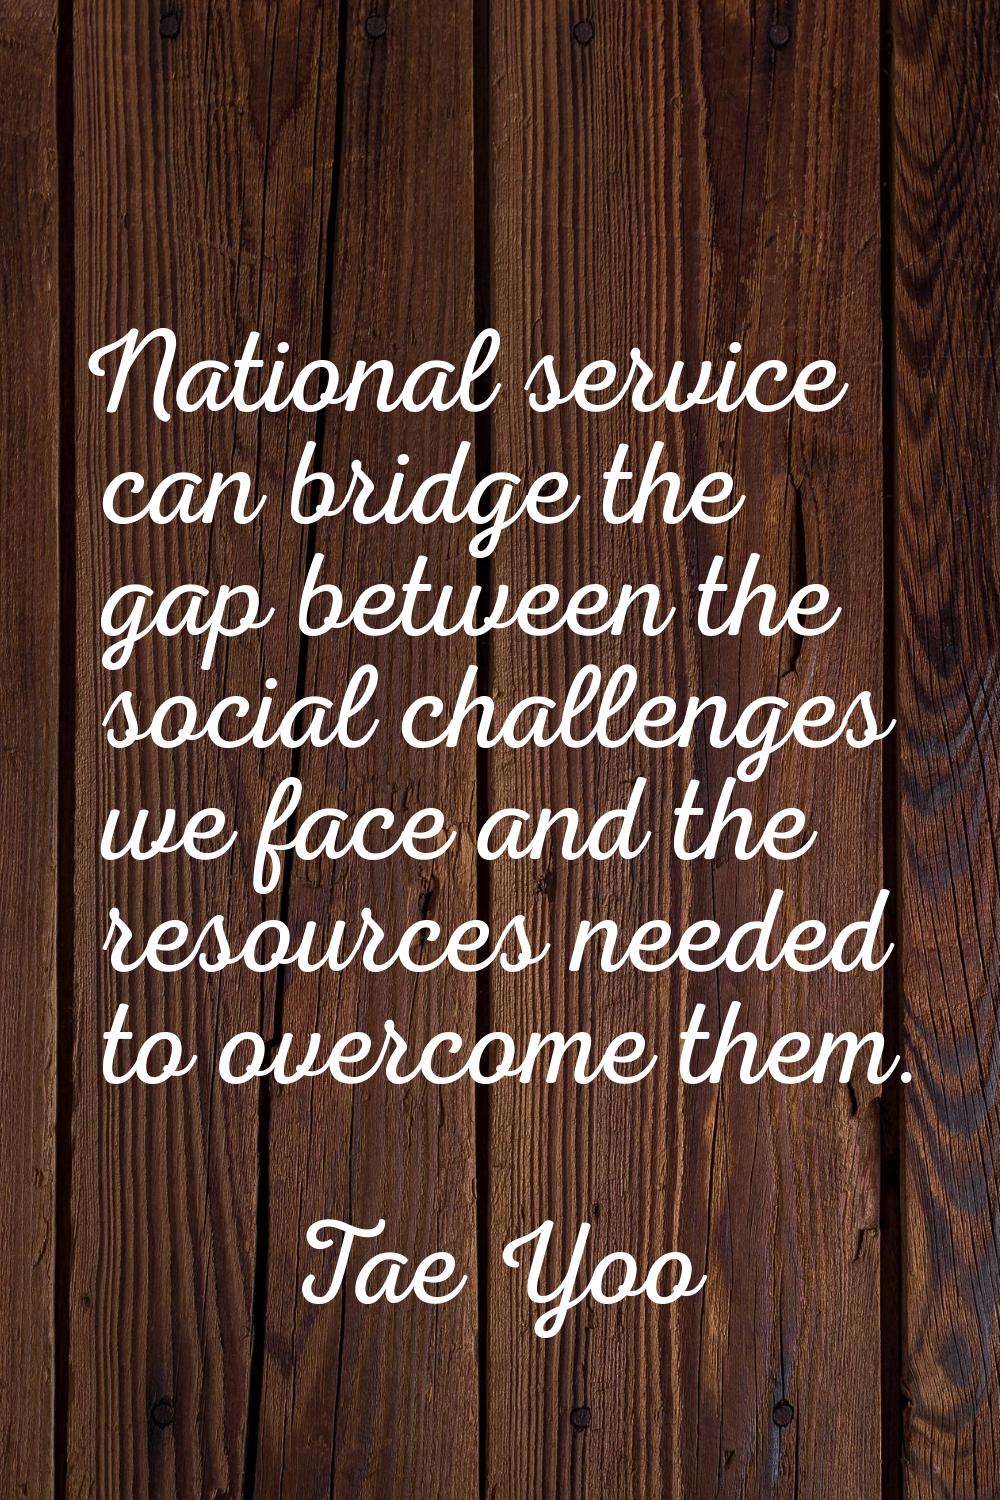 National service can bridge the gap between the social challenges we face and the resources needed 